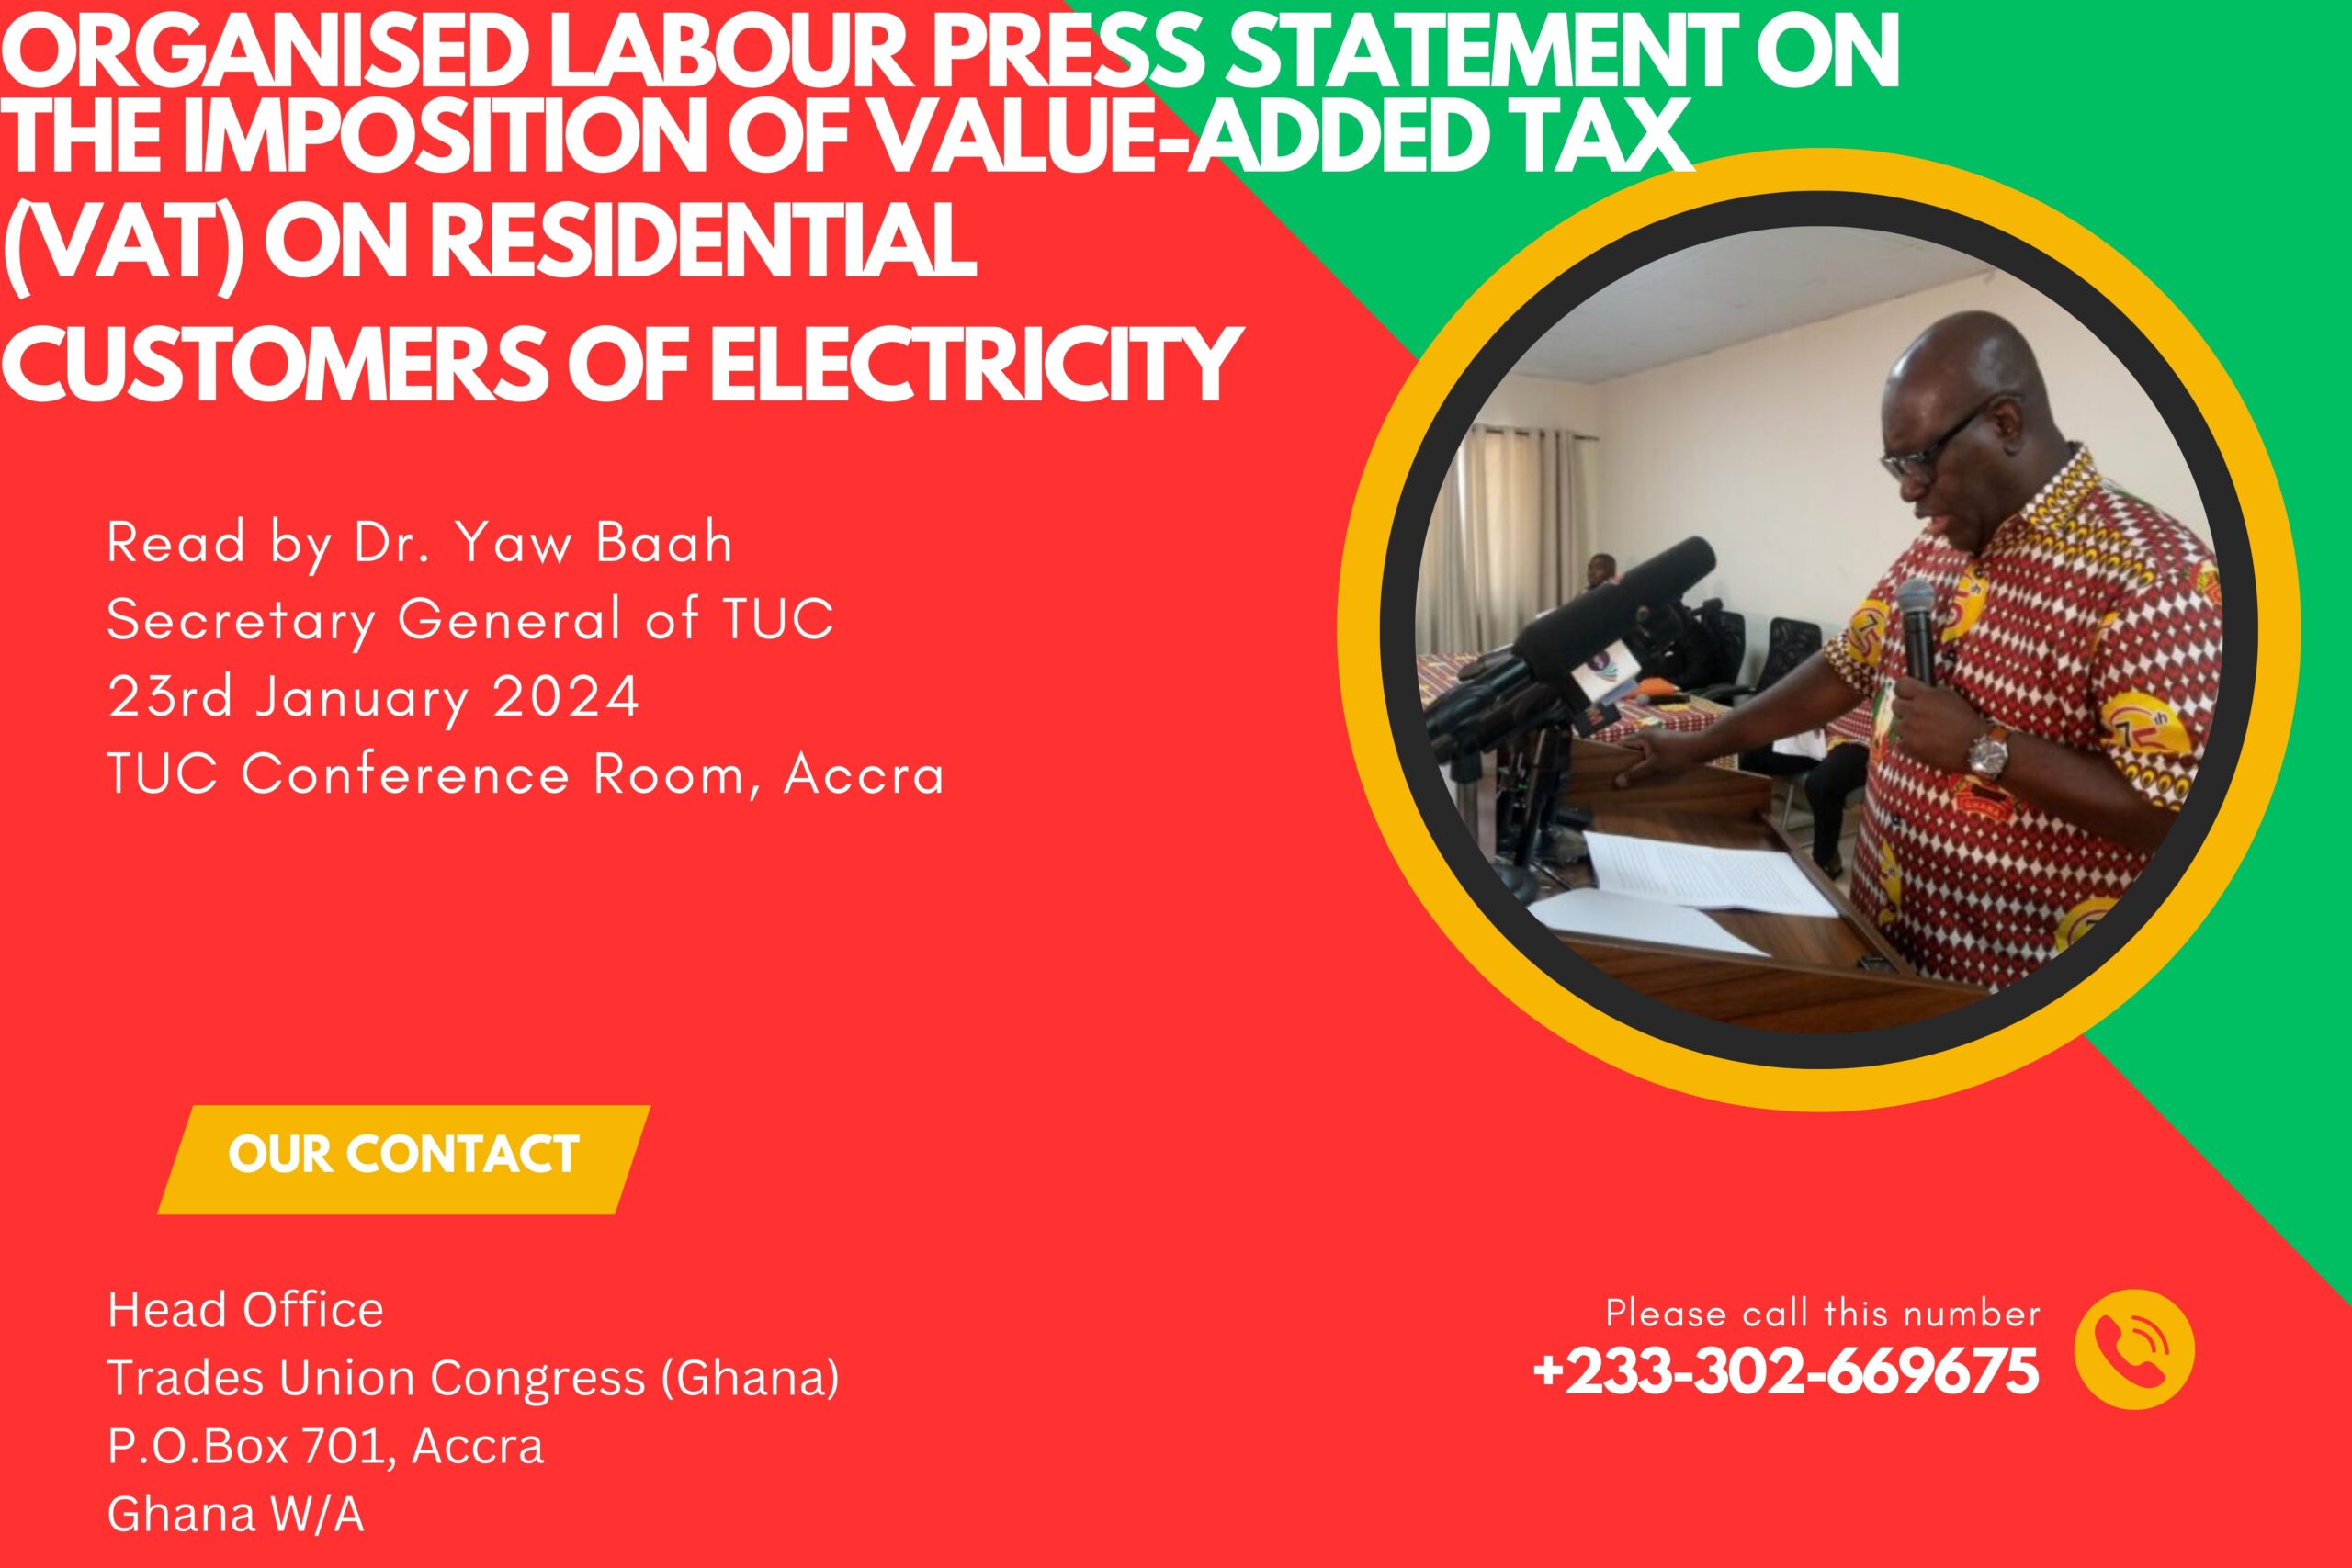 ORGANISED LABOUR PRESS STATEMENT ON THE IMPOSITION OF VALUE ADDED TAX (VAT) ON RESIDENTIAL CUSTOMERS OF ELECTRICITY